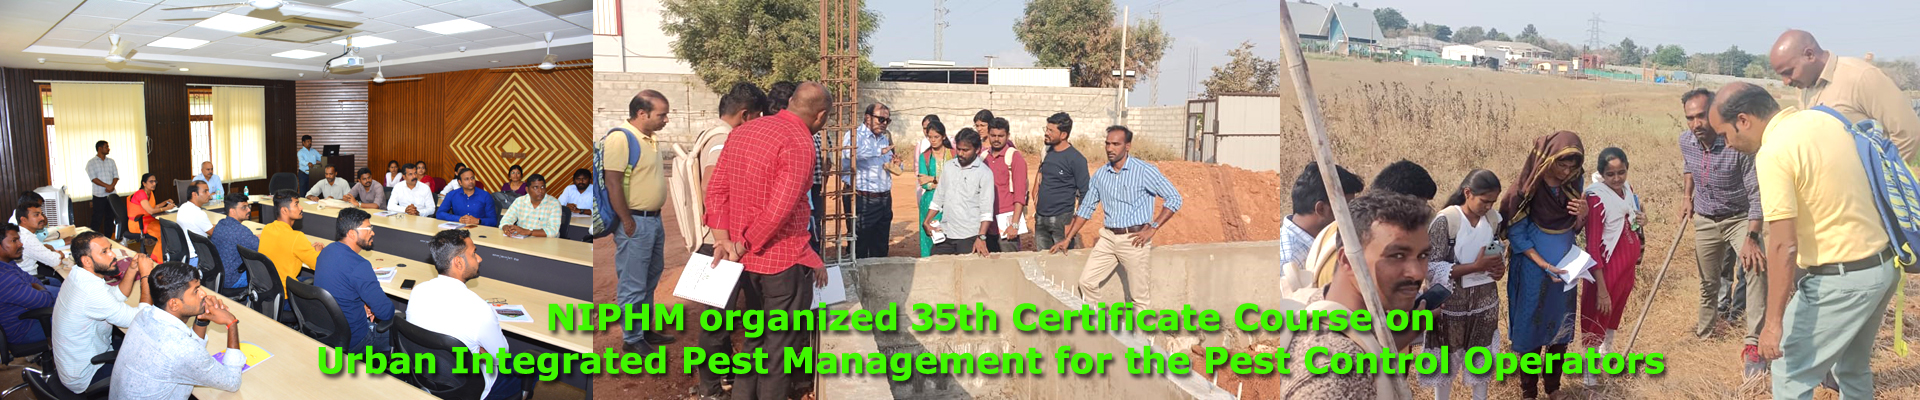 NIPHM organized (35th) Certificate Course on Urban Integrated Pest Management for the Pest Control Operators